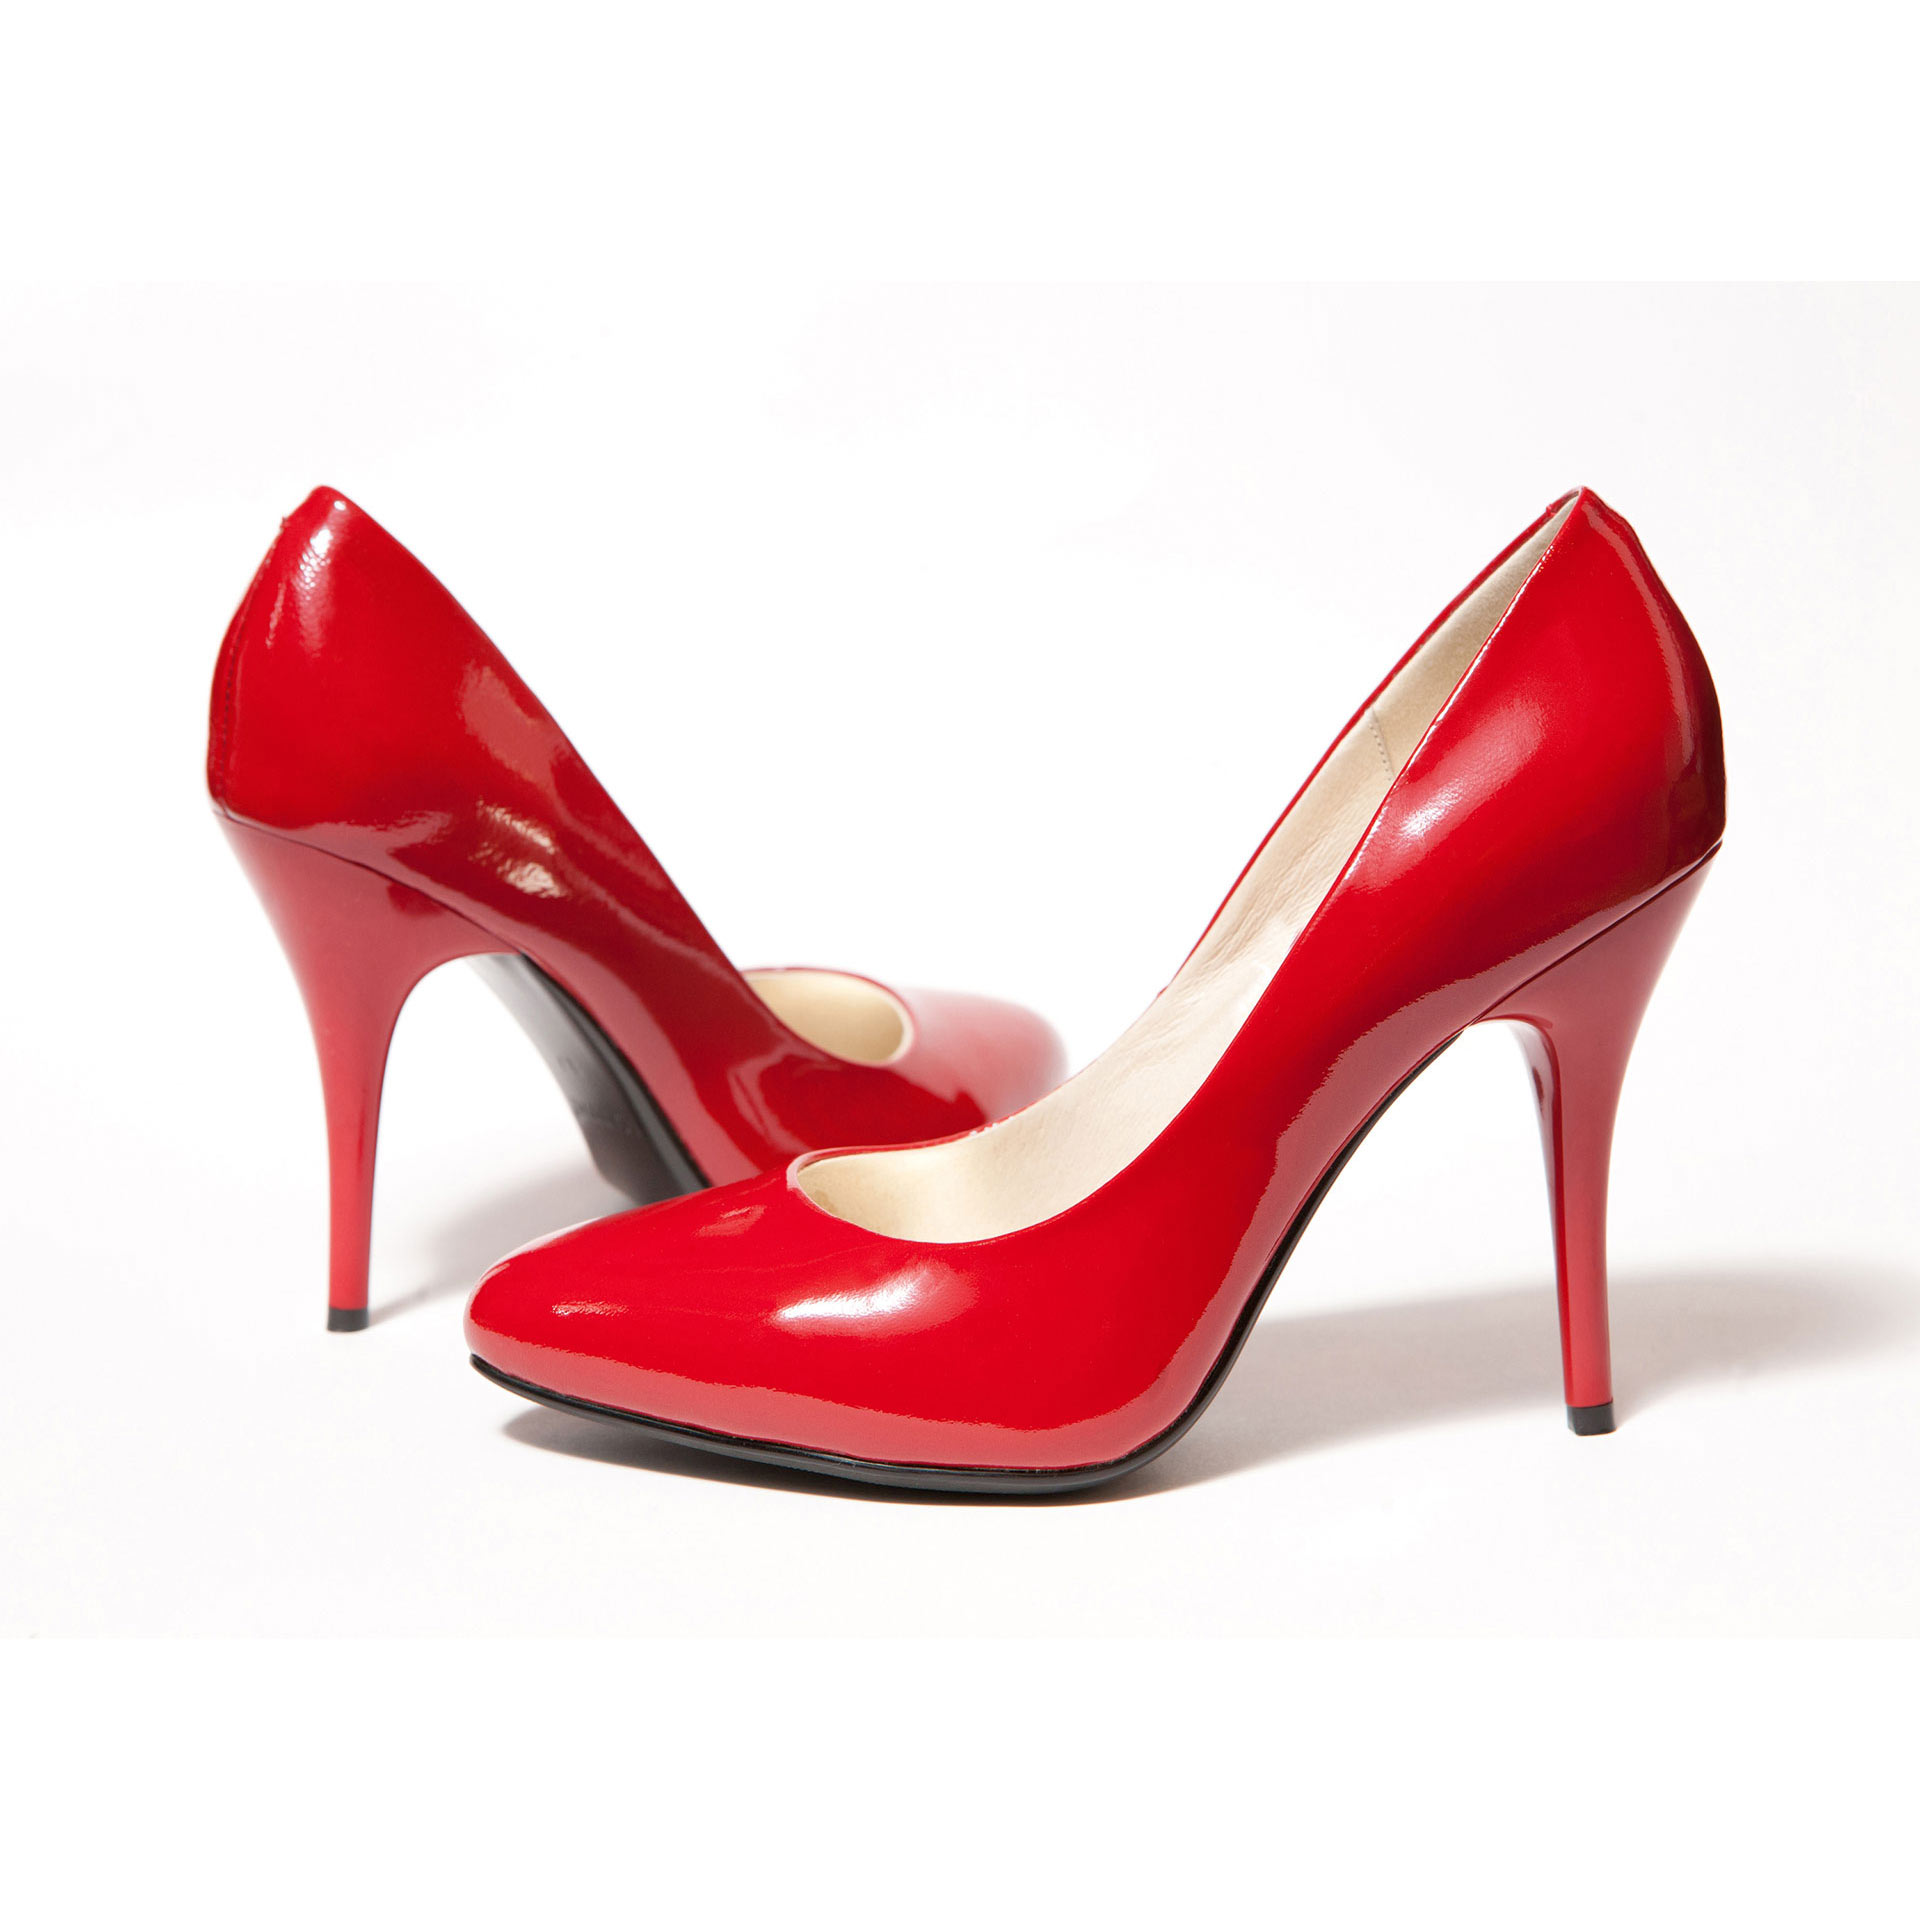 Dropship Women Pumps; Simple Fashion High Heels; Stilettos; Sexy Patent  Pointed Shoes; Hollow Slim High Heels. to Sell Online at a Lower Price |  Doba